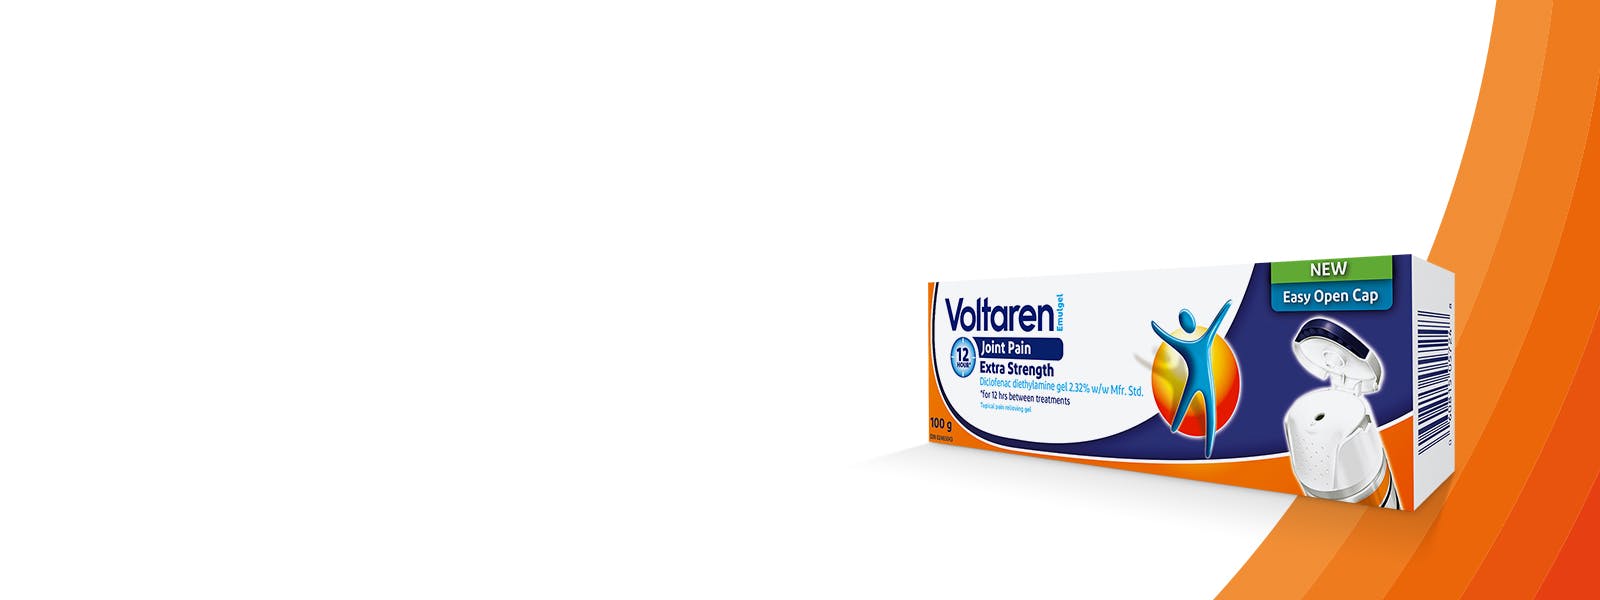 Voltaren 2.32% Diclofenac Gel for joint and back pain relief product